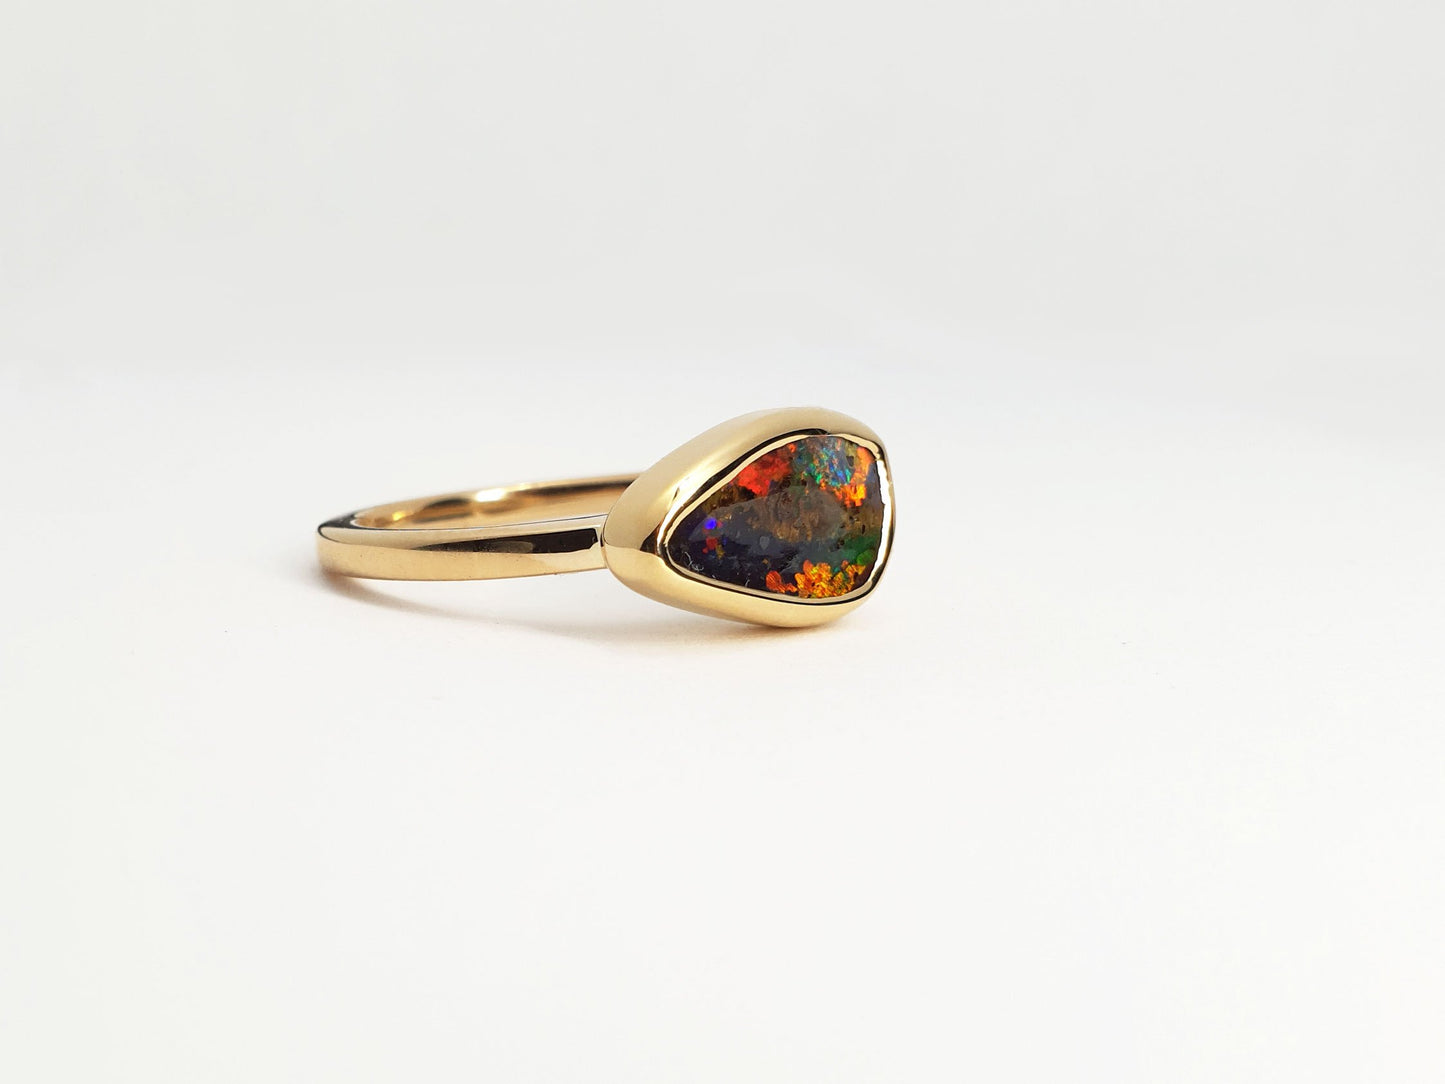 18ct yellow gold polished gold ring with Queensland boulder opal. Opal flashes red, blue, green and purple. Australian designed and Australian made for a high quality finish. Ethical and fine fashion by Custom Jewellery Co by using ethically sourced local products and handcrafted in our Coastal Queensland Studio